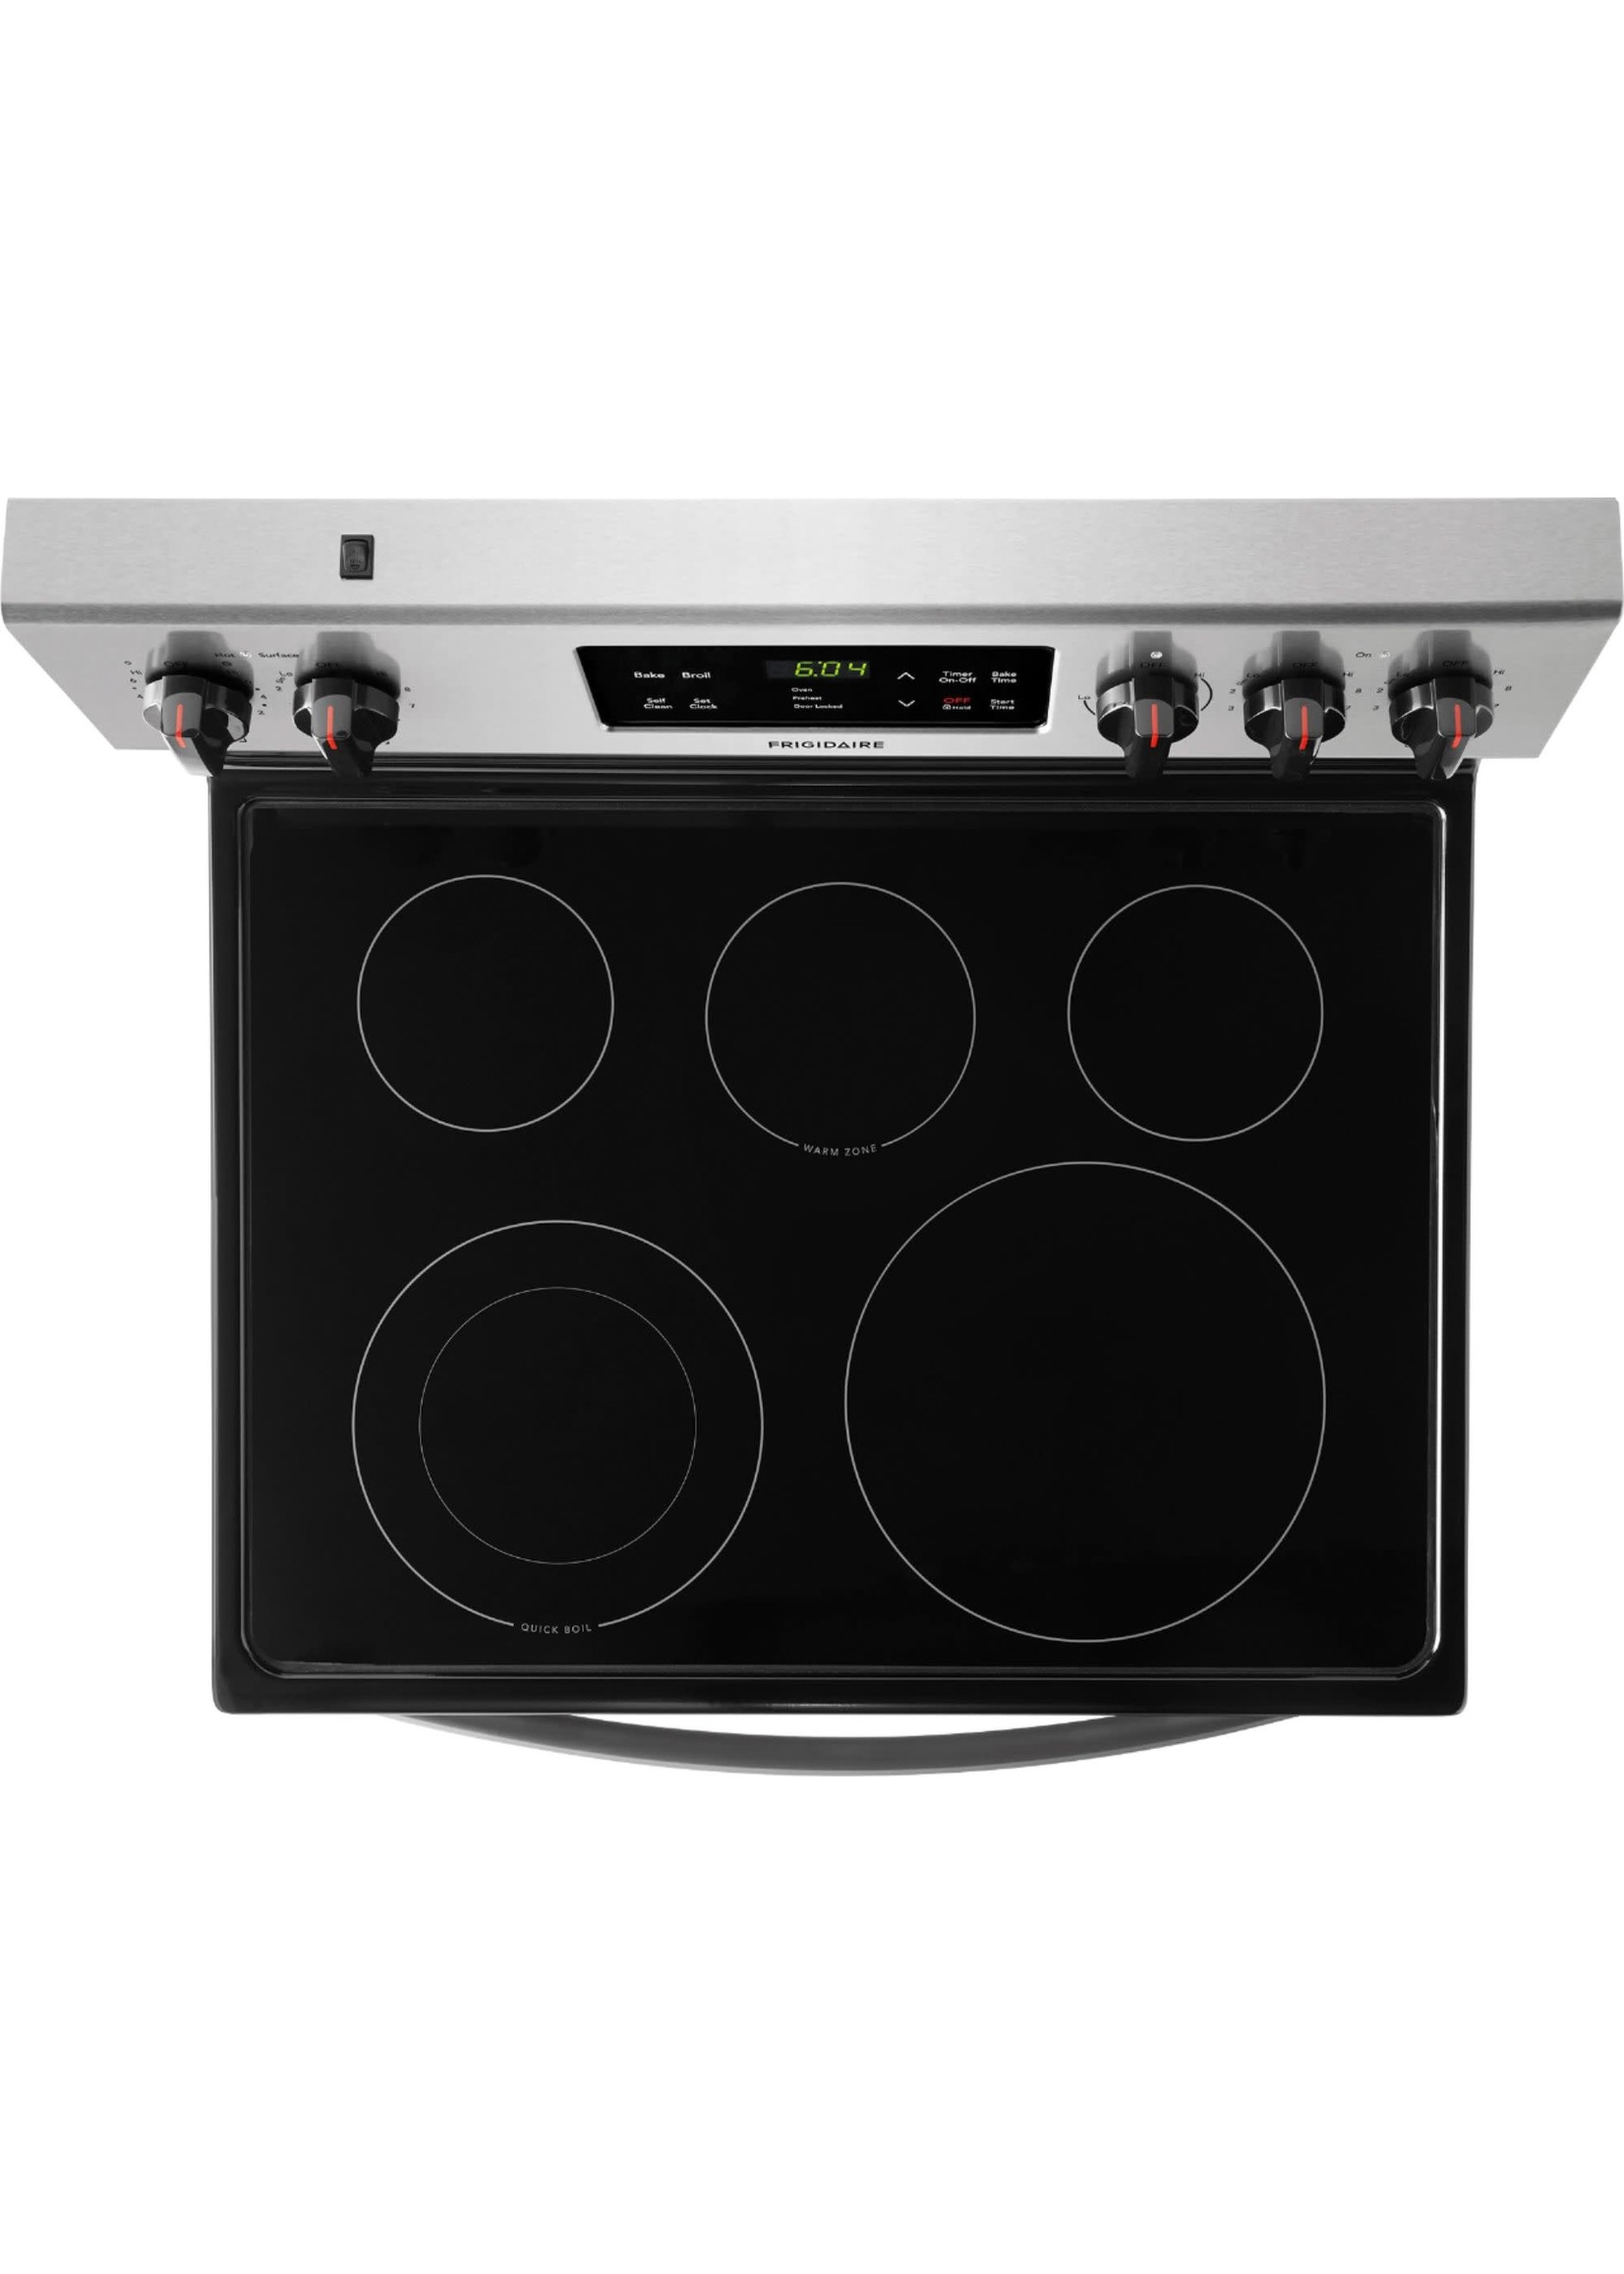 FRIGIDAIRE Electric Range with One-touch Self Clean - 5.3 cu. ft. Stainless Steel